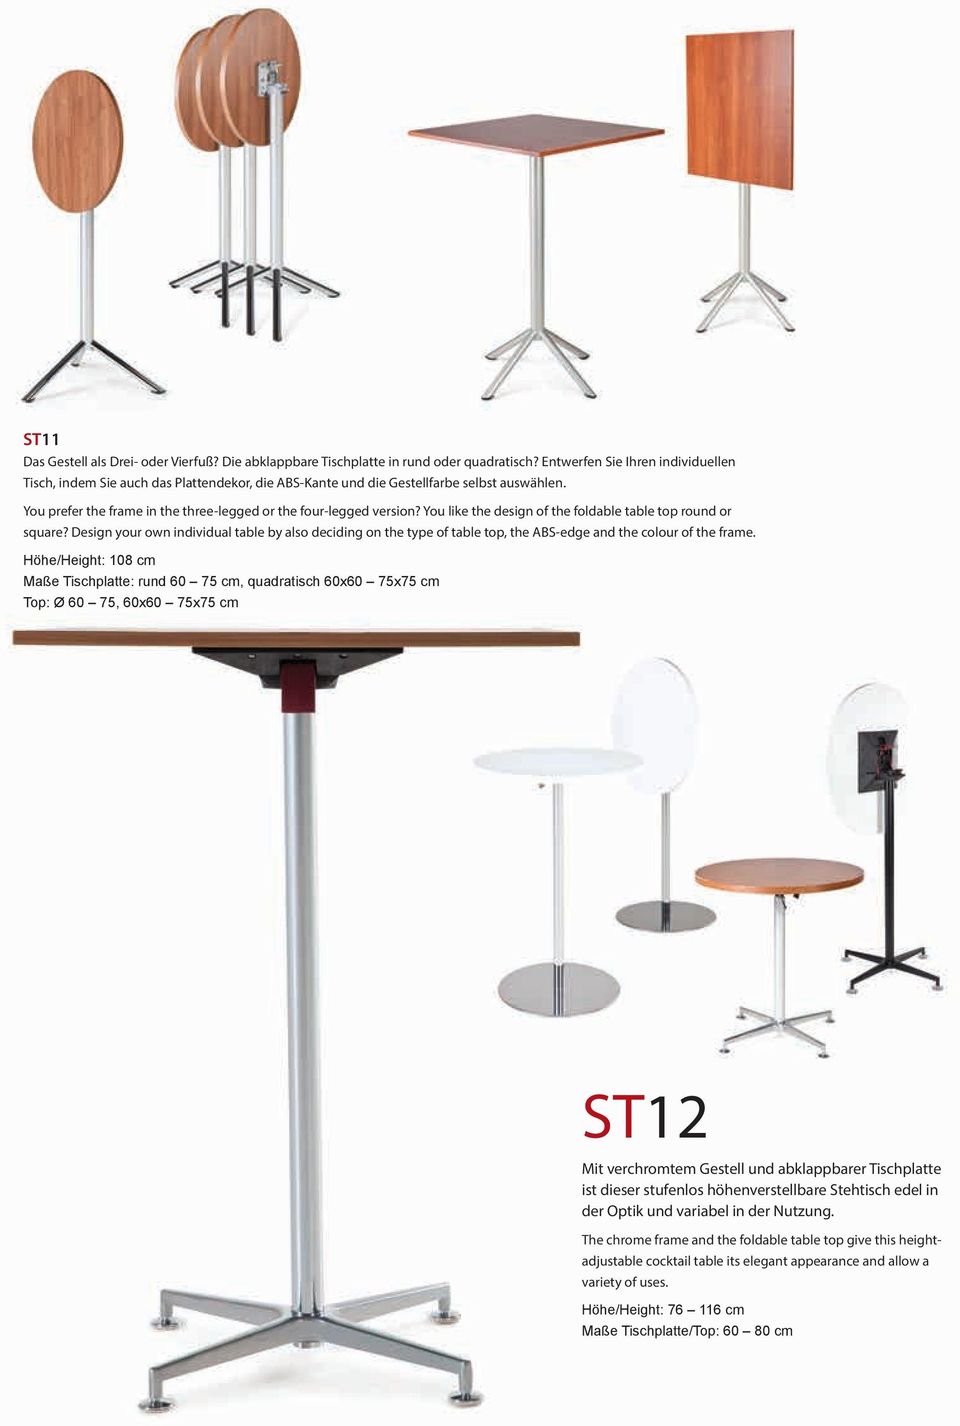 You like the design of the foldable table top round or square? Design your own individual table by also deciding on the type of table top, the ABS-edge and the colour of the frame.